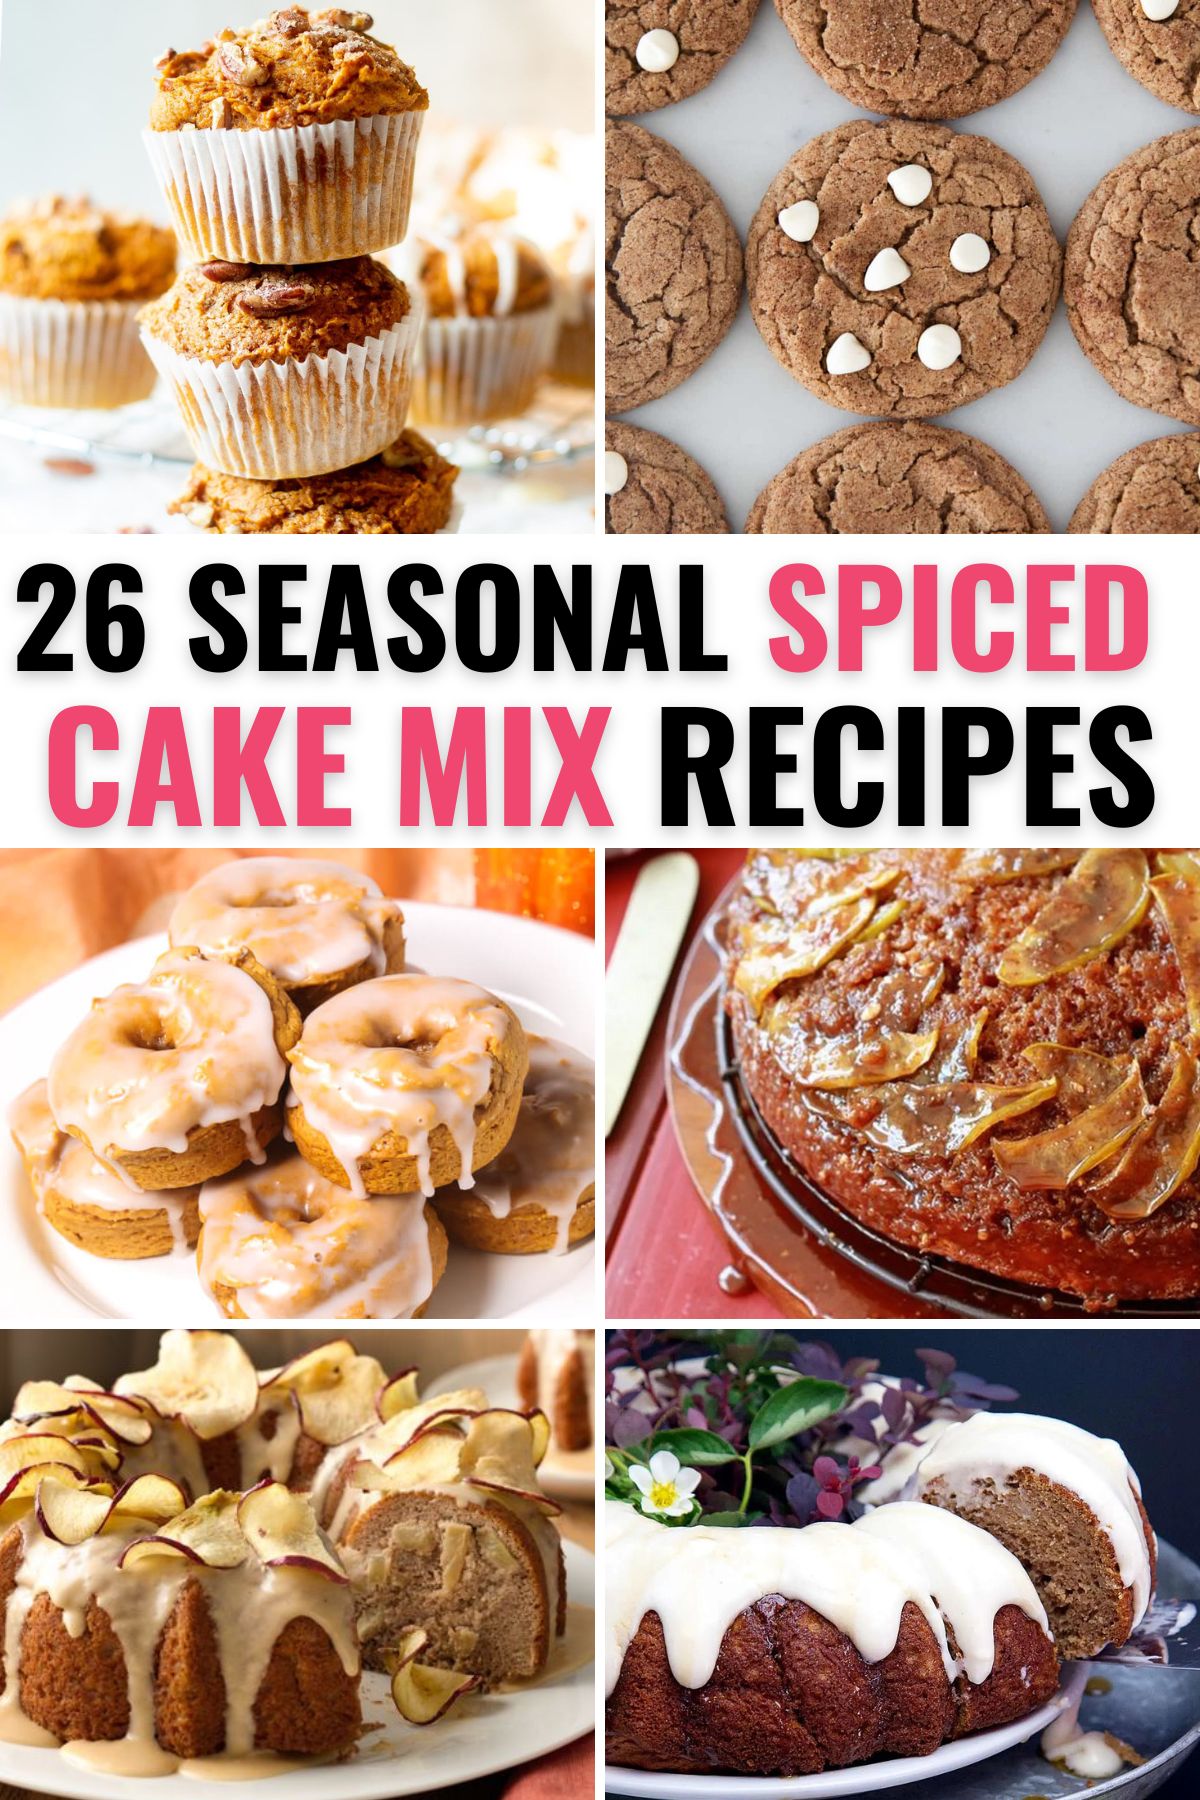 A collection of spiced muffins, cookies, donuts, and cakes